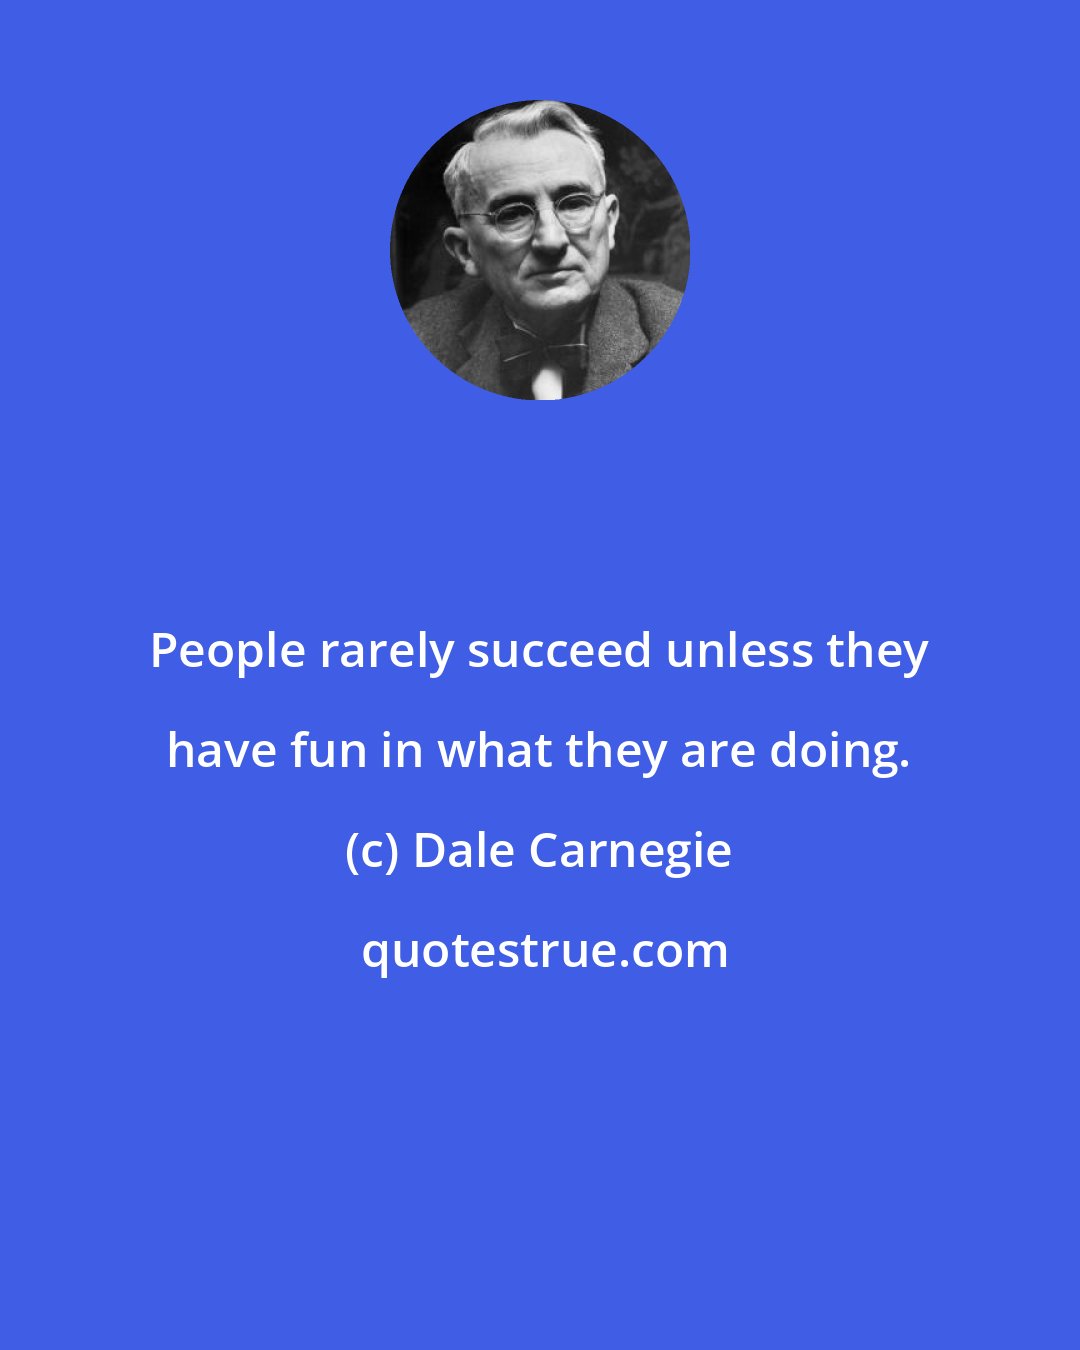 Dale Carnegie: People rarely succeed unless they have fun in what they are doing.